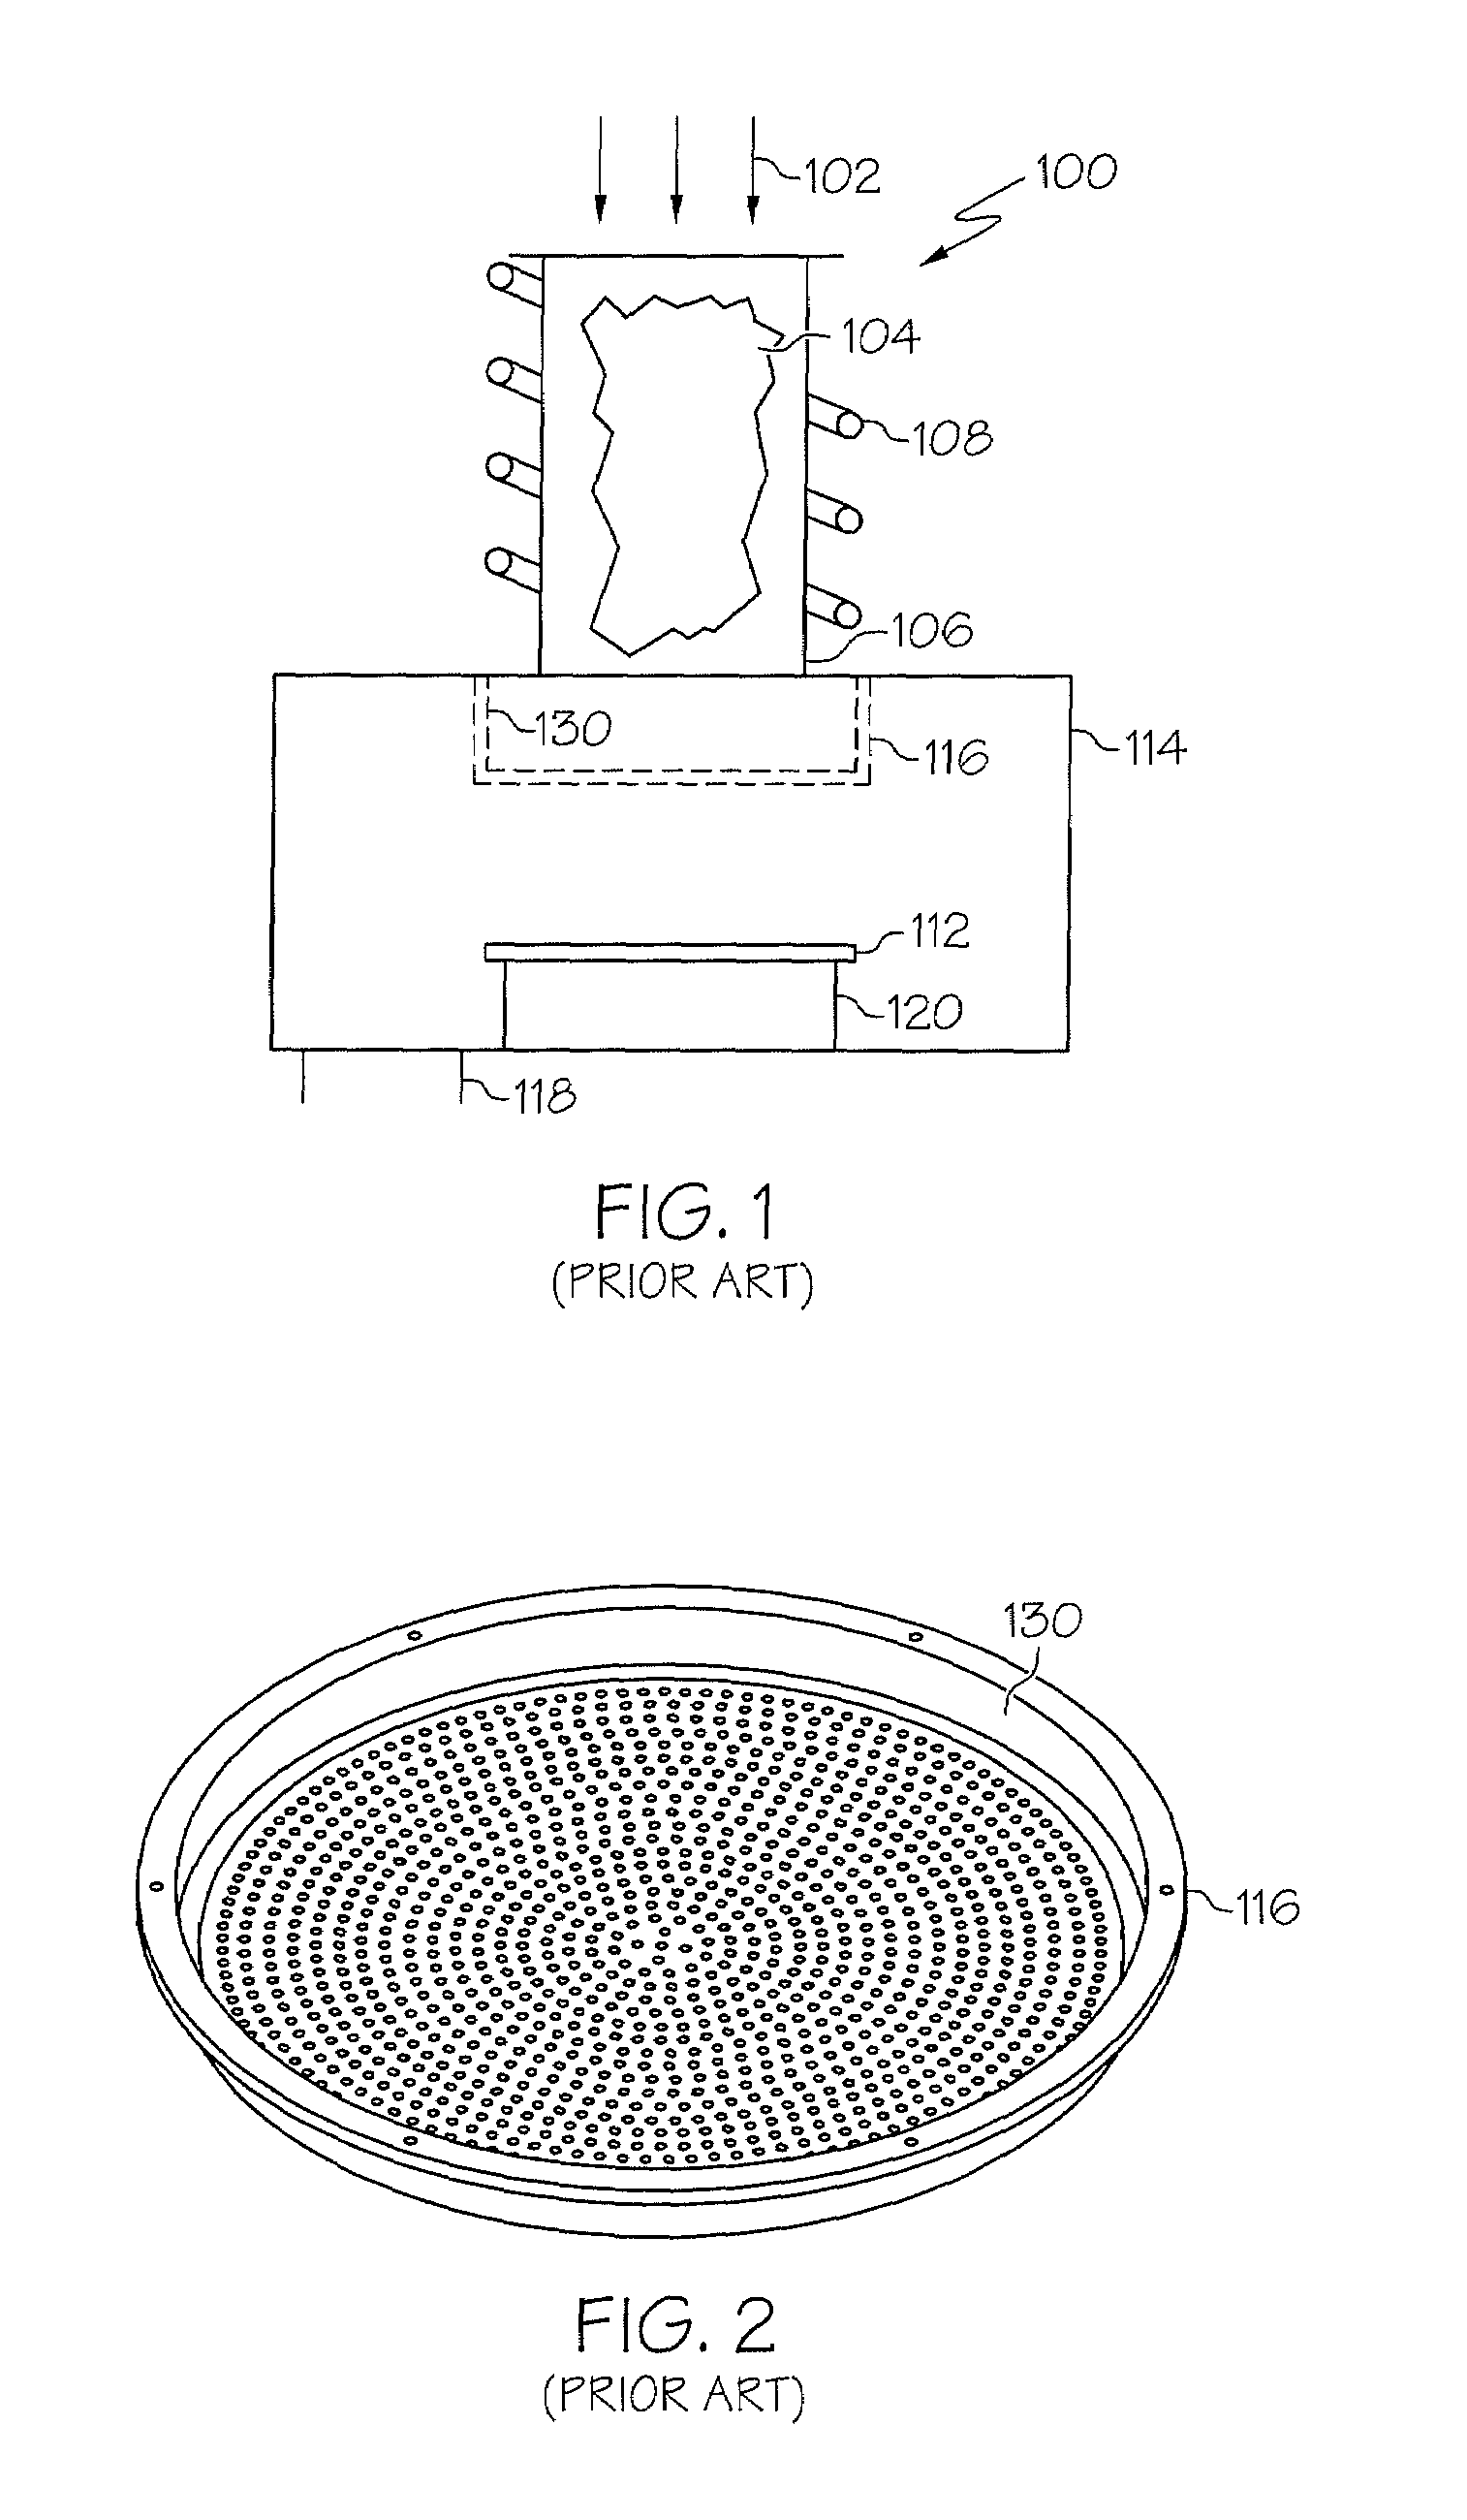 Plasma Reaction Apparatus Having Pre-Seasoned Showerheads and Methods for Manufacturing the Same